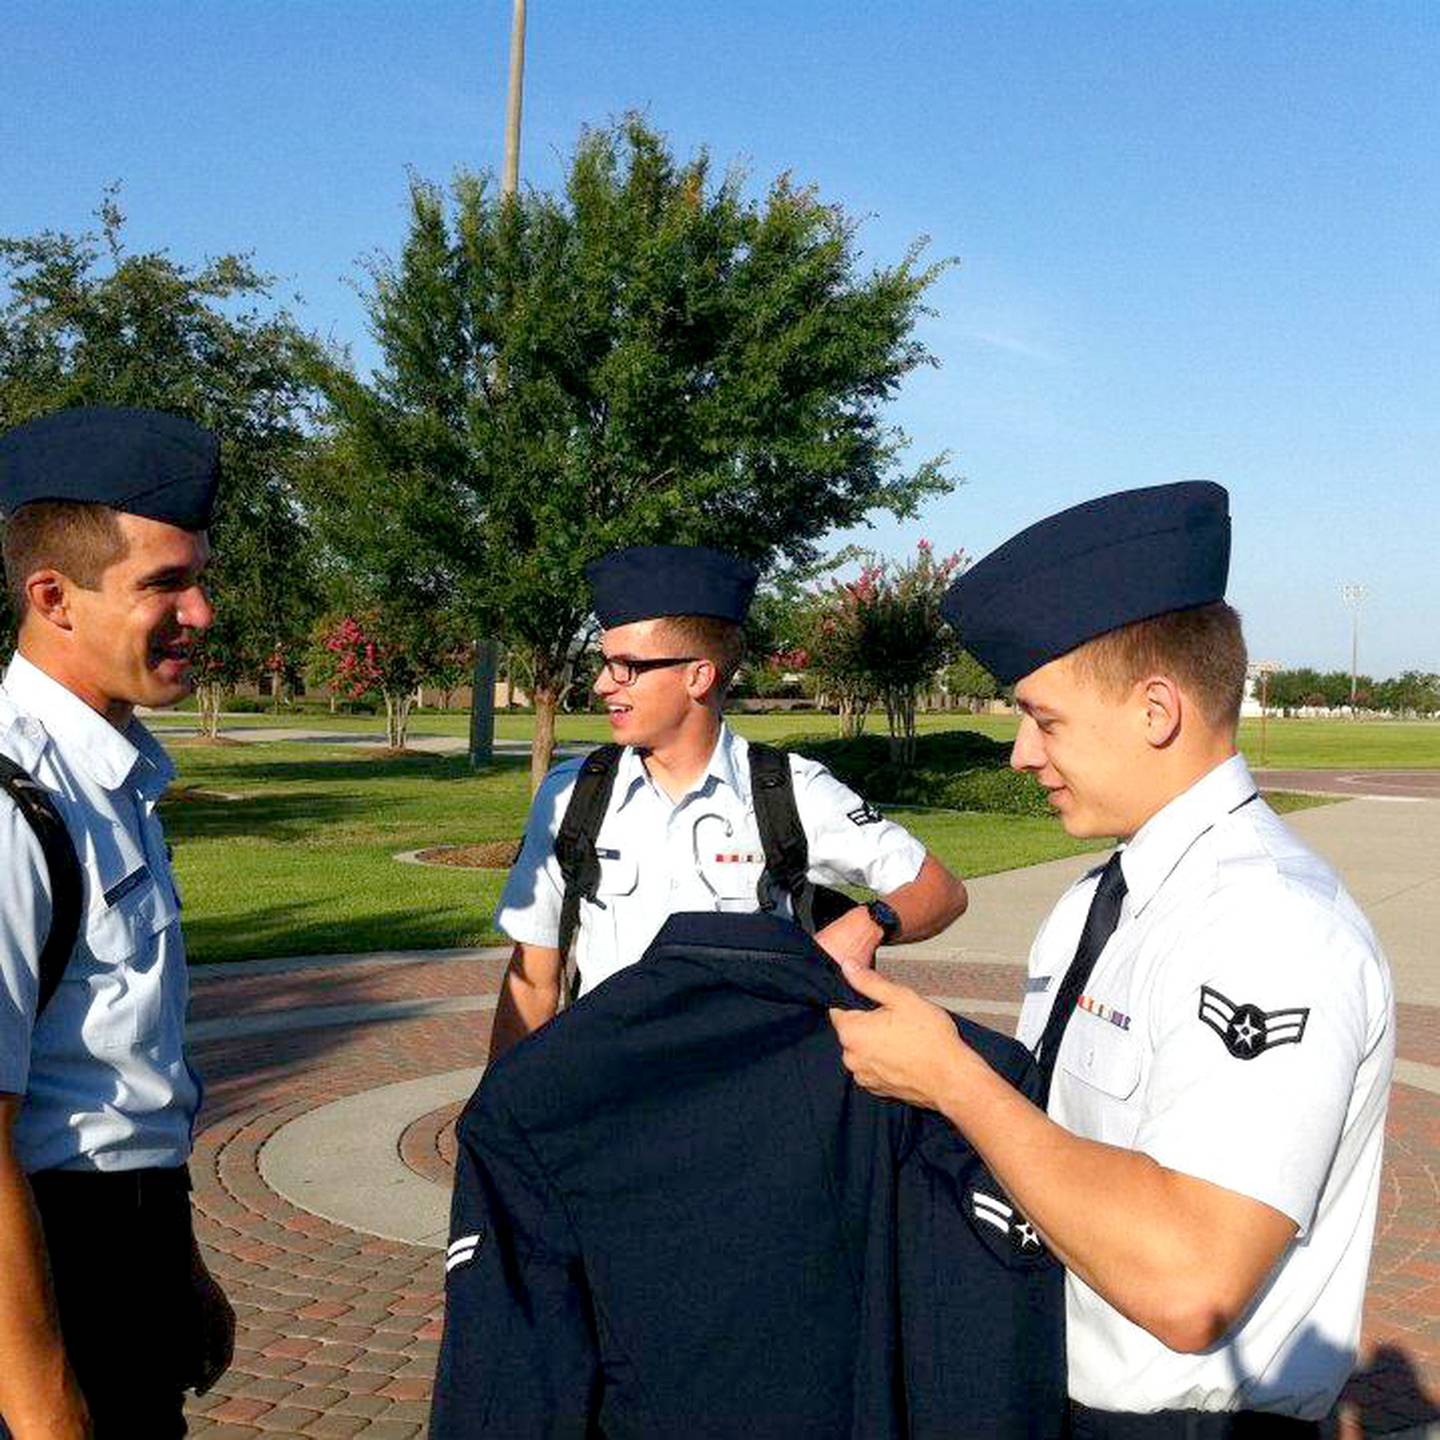 Larry Baca (far right) served for six years in the United States Air Force and finished as a staff sergeant. Baca is now a coach and teacher at Downers Grove North High School.